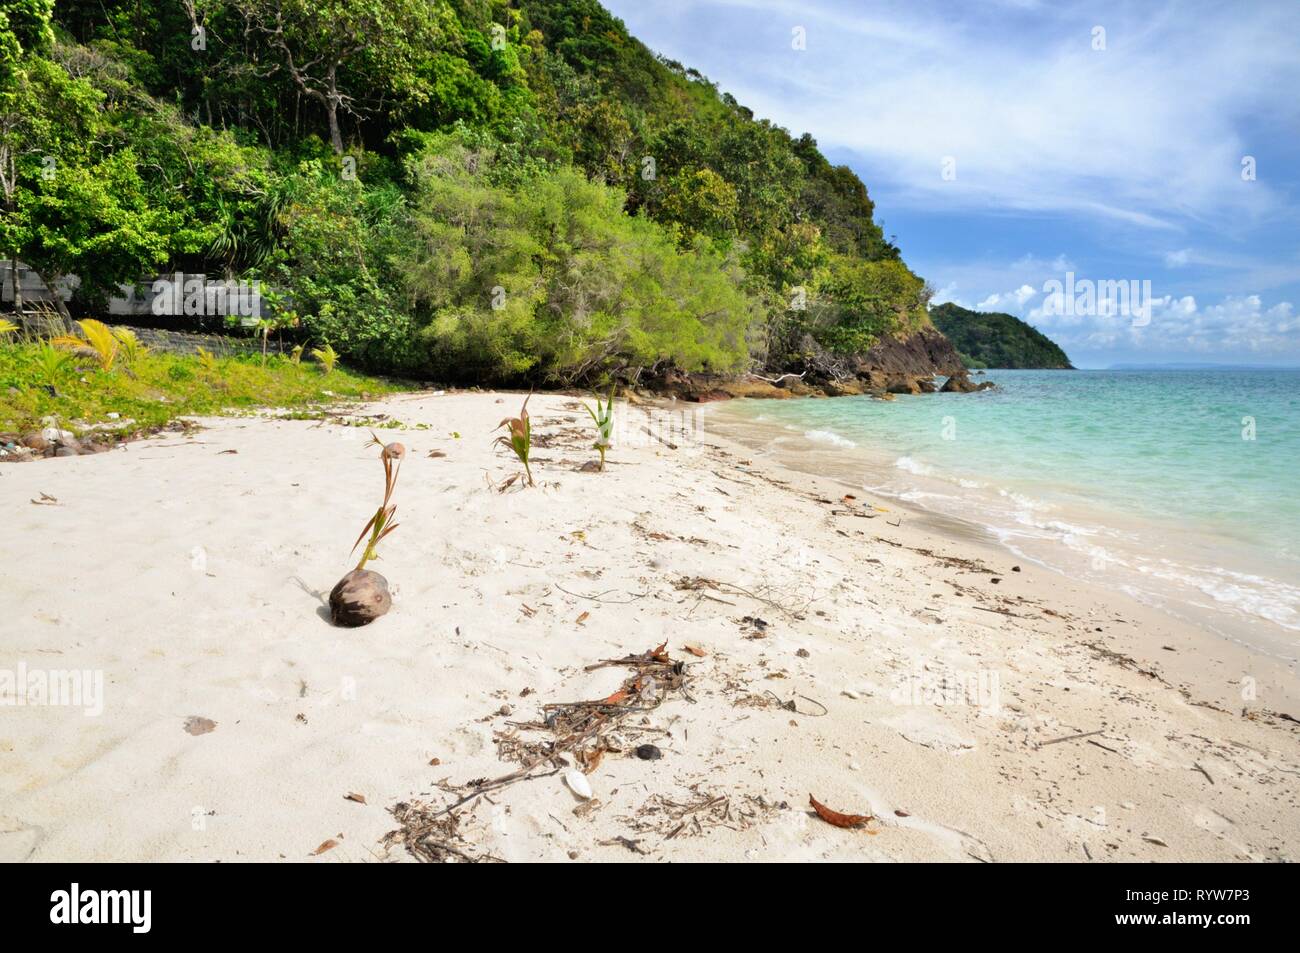 Coconut growing on the tropical sandy beach on the Koh Chang island, Thailand. Stock Photo